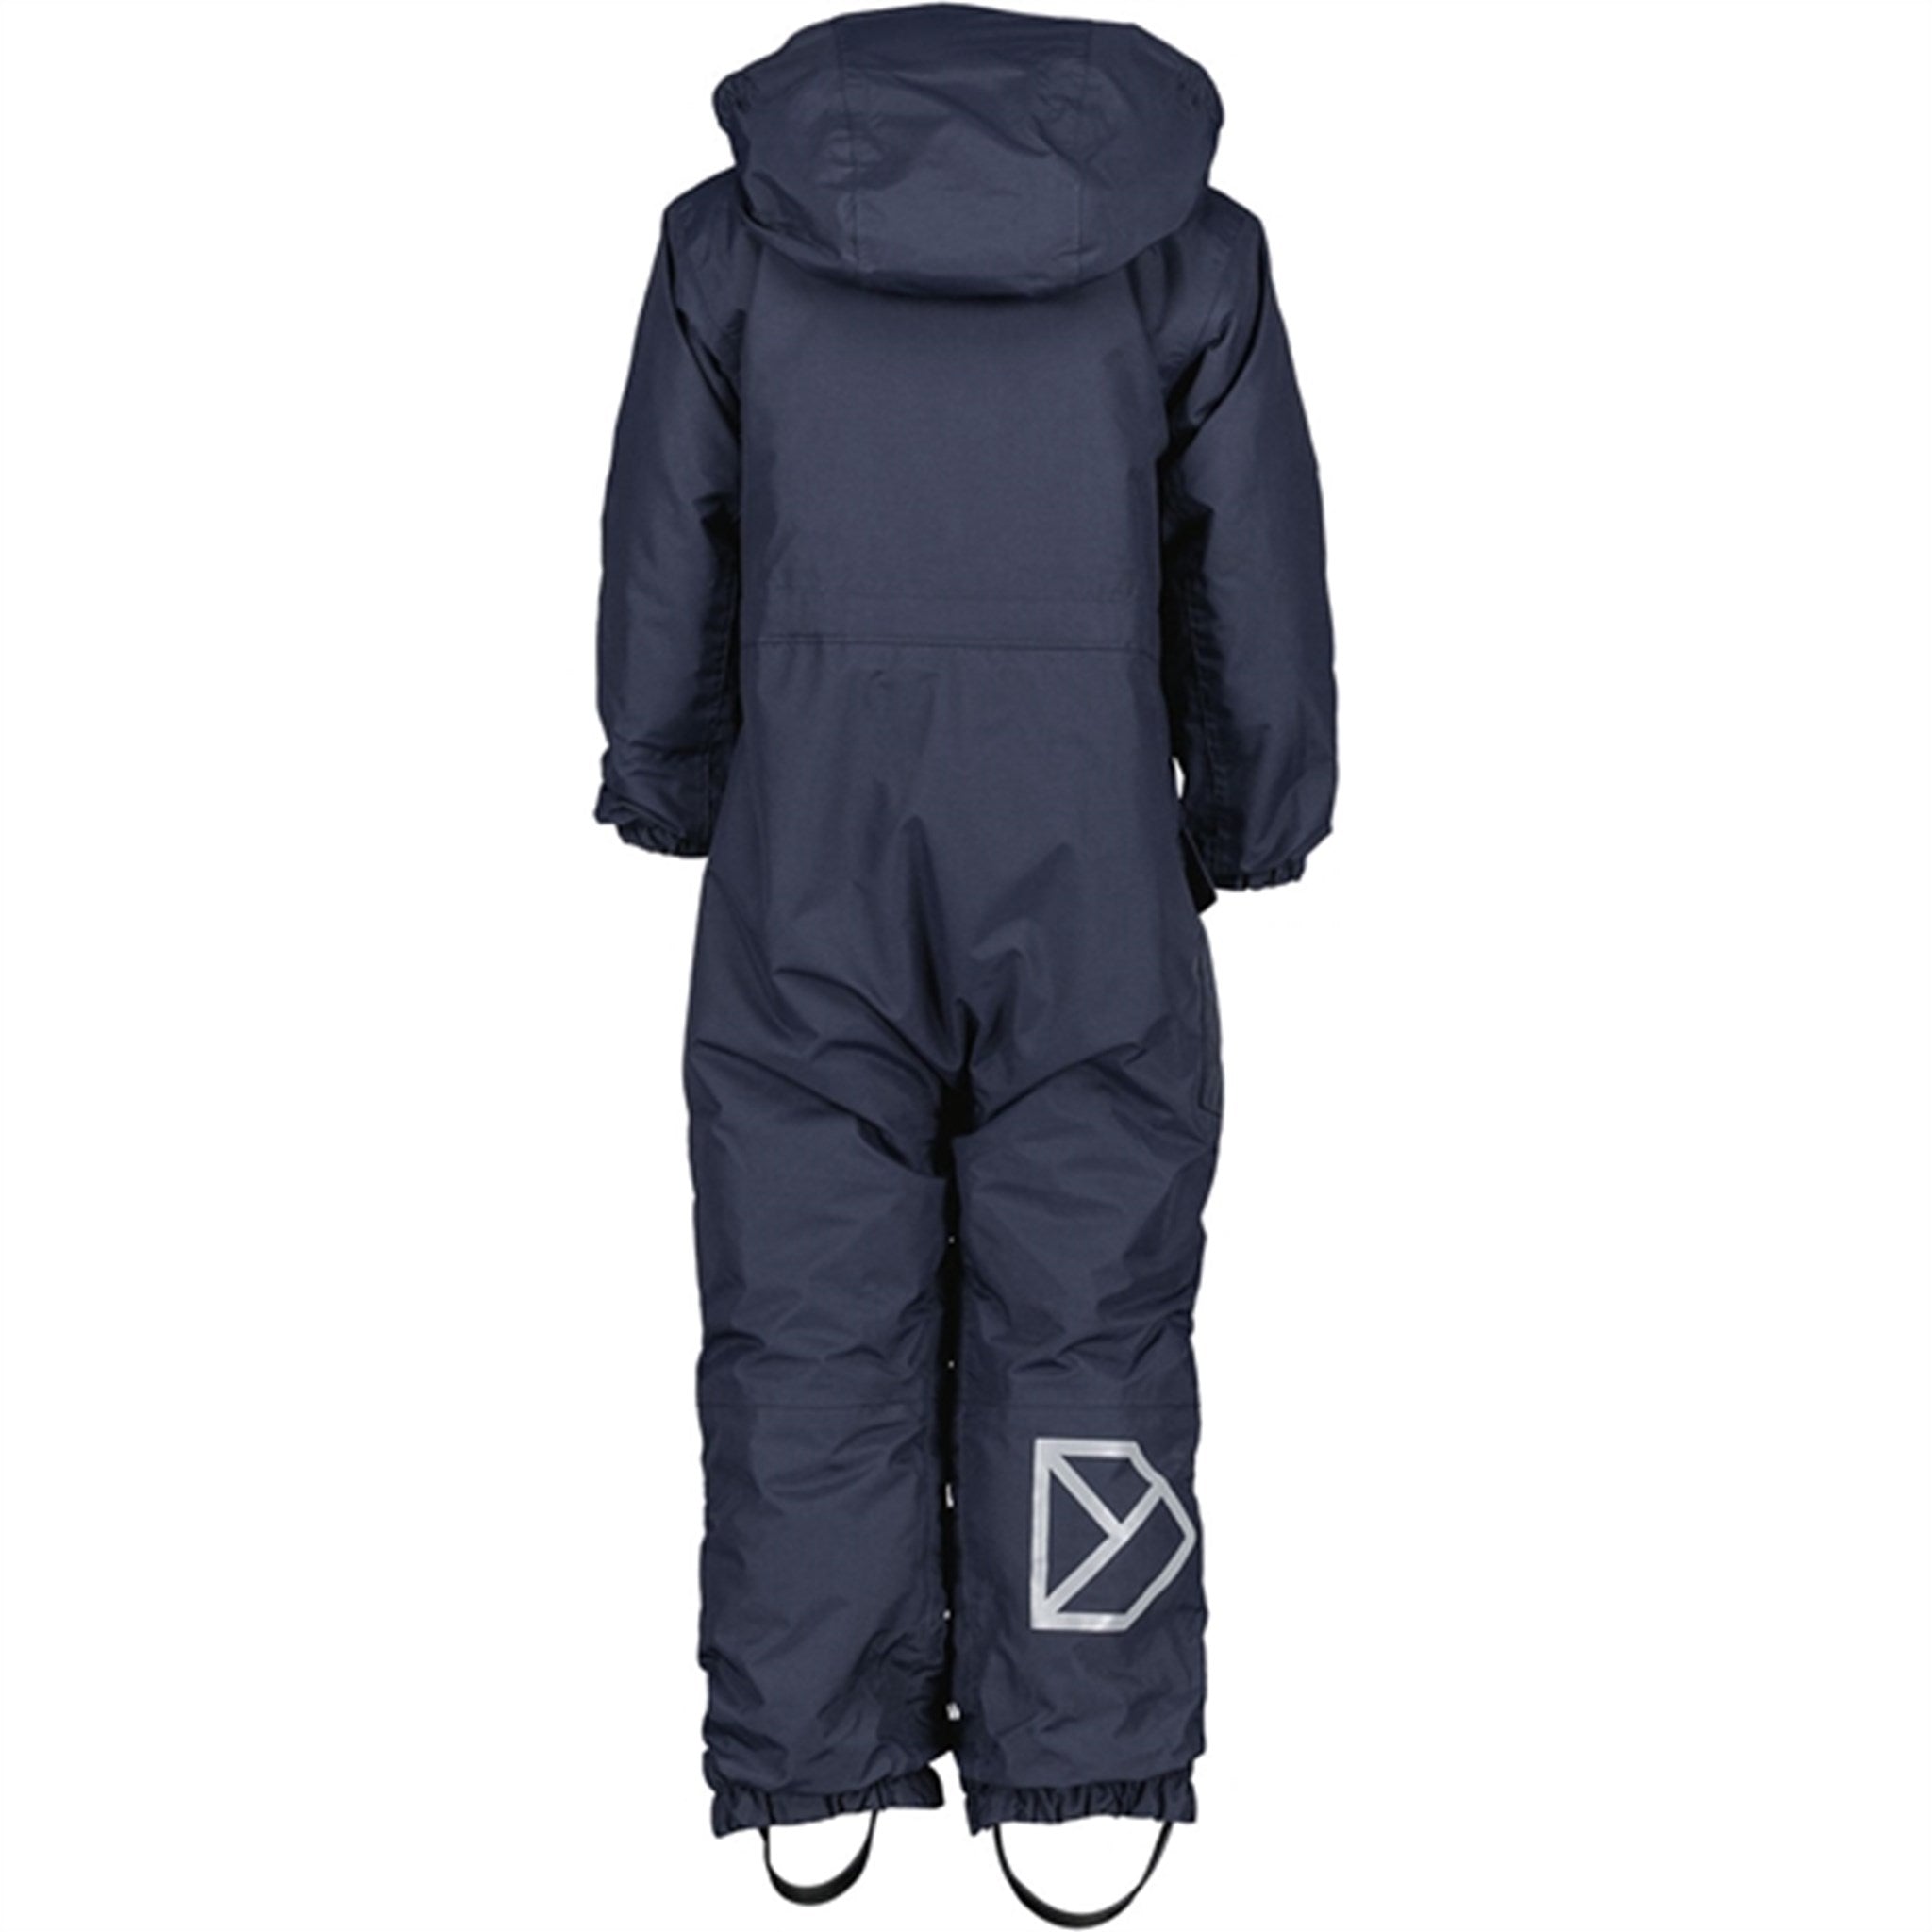 Didriksons Navy Rio Kids Cover 2 Coverall 7